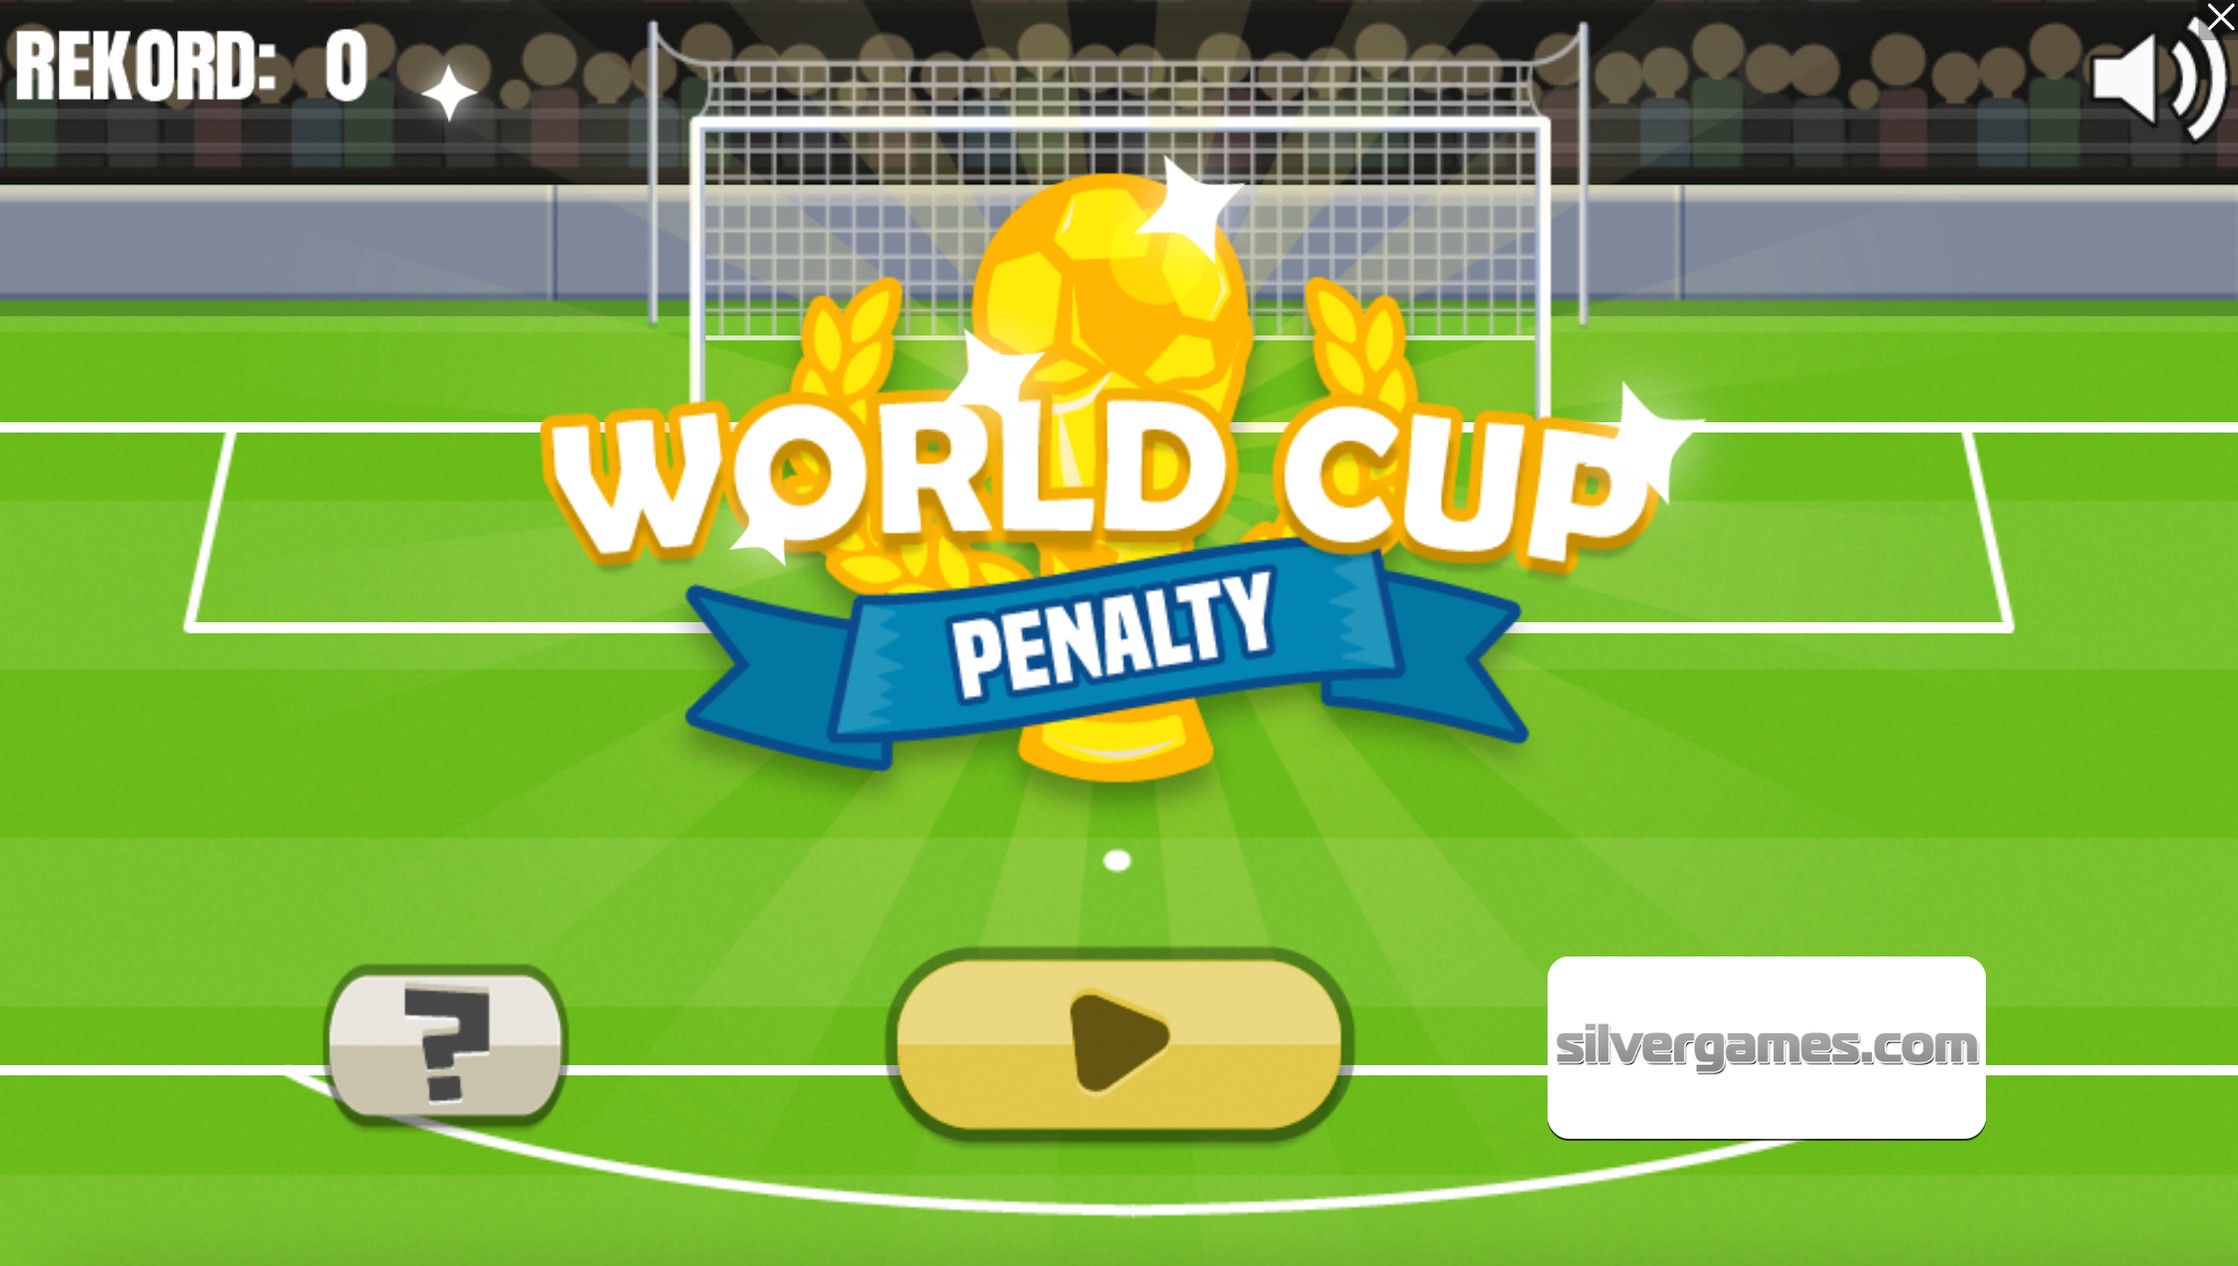 World Cup Penalty - Free Play & No Download